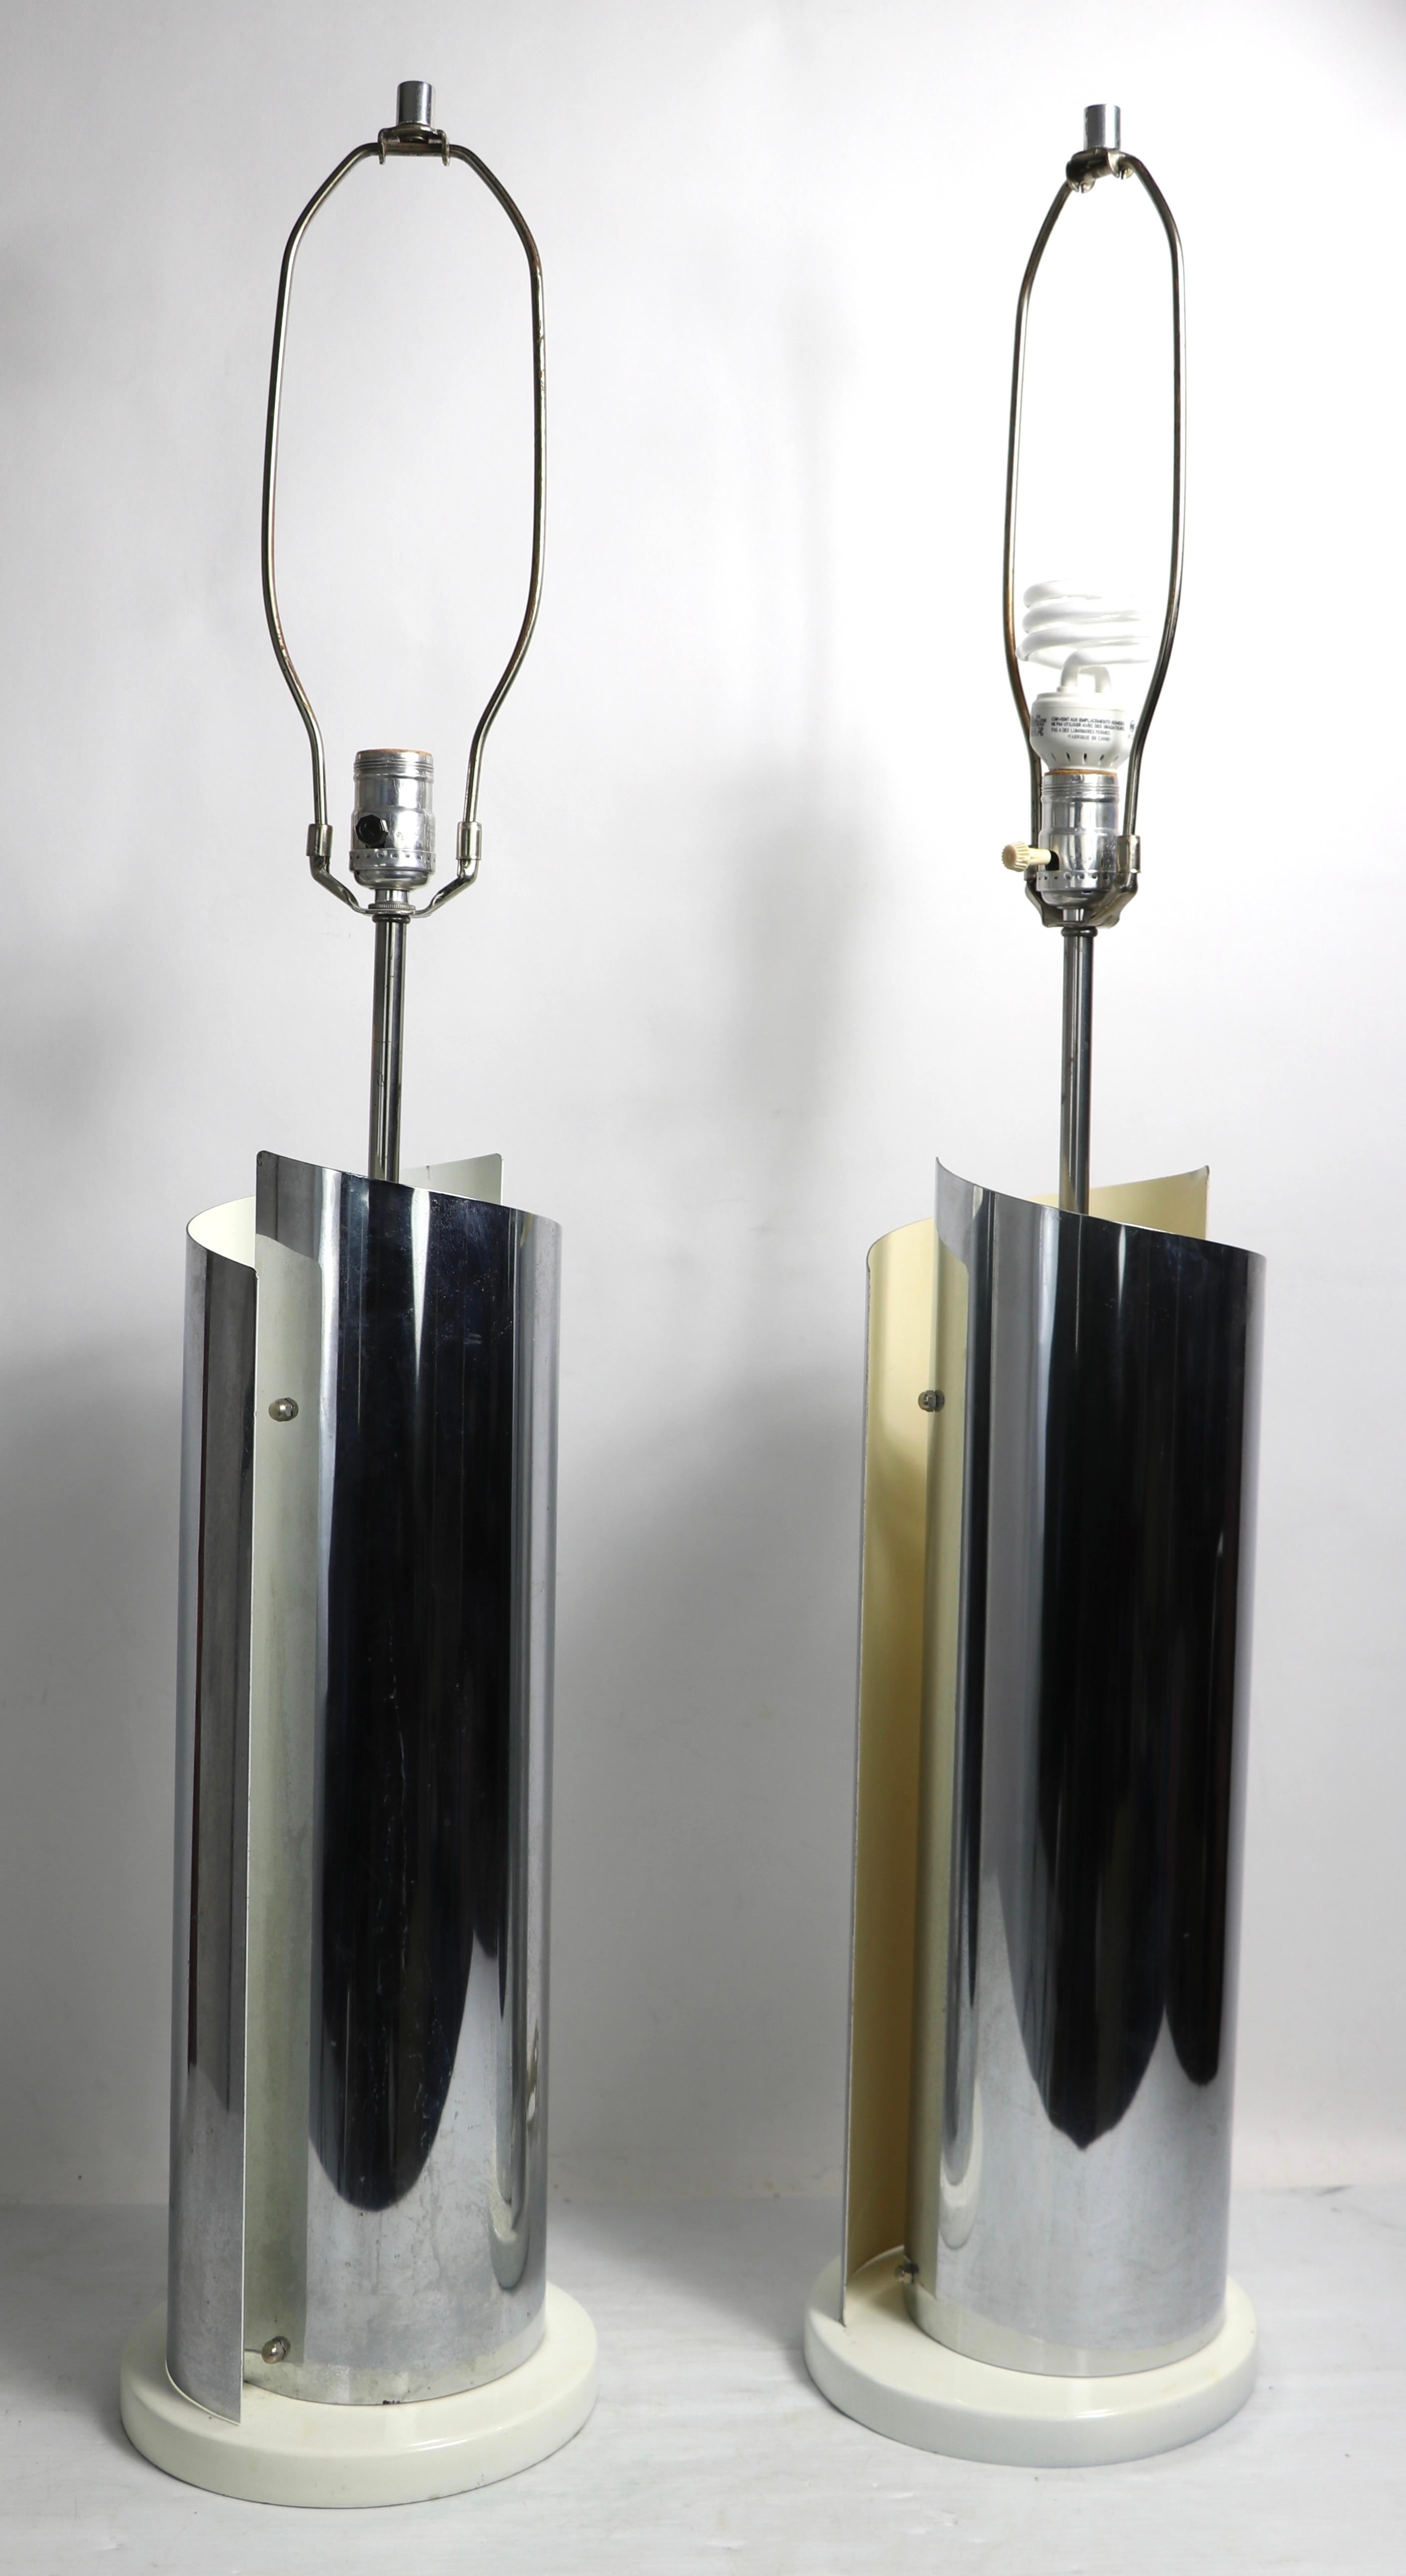 Pair of chrome table lamps having interlocking curved elements with white interiors. Each lamp features an inner socket, and an upper socket. The white paint finish one one lamp has patinated to a warmer color than the other, both are in original